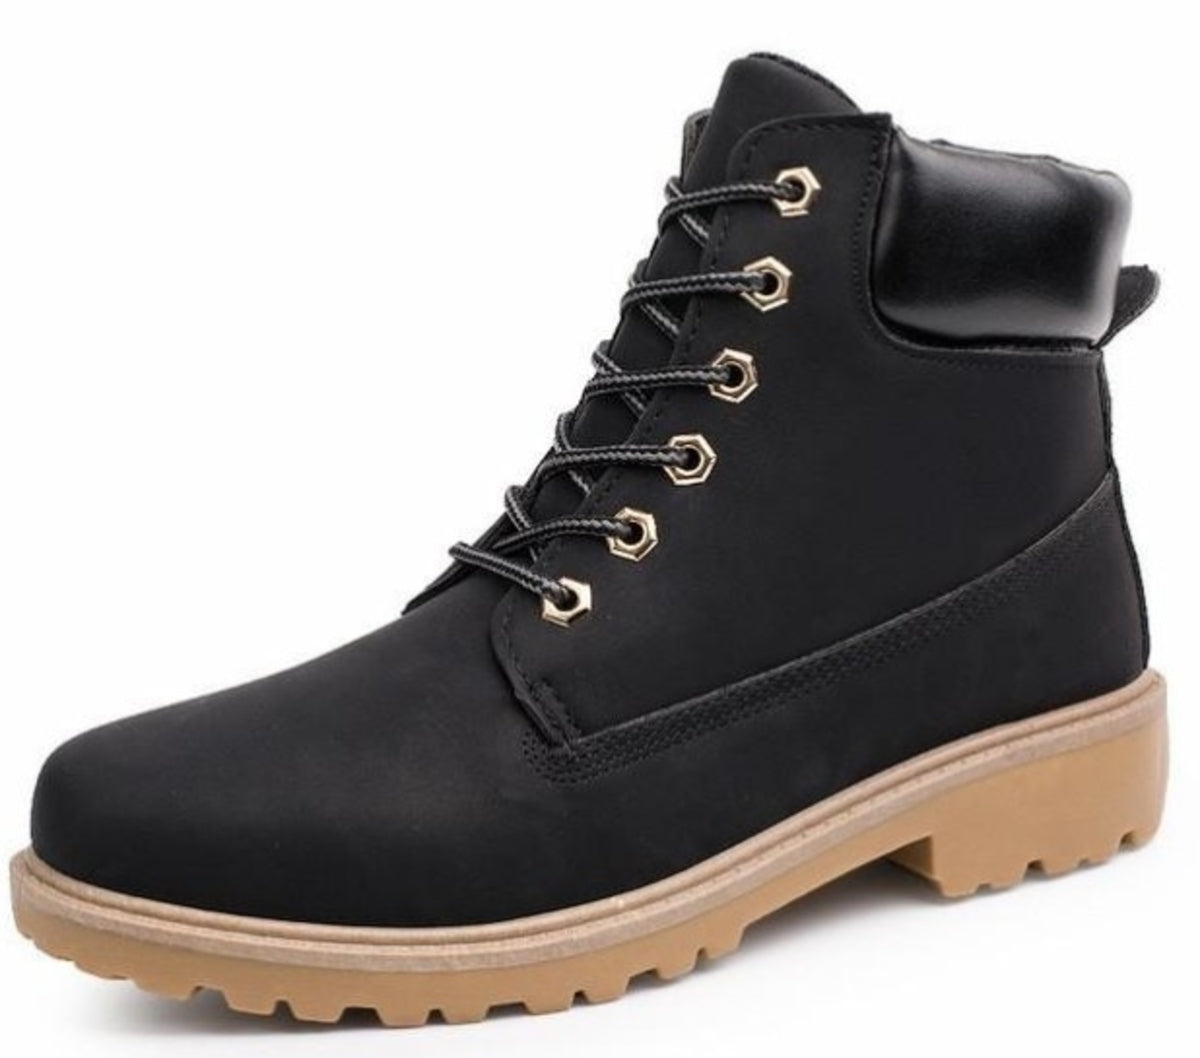 Mens Army Style Waterproof Boots